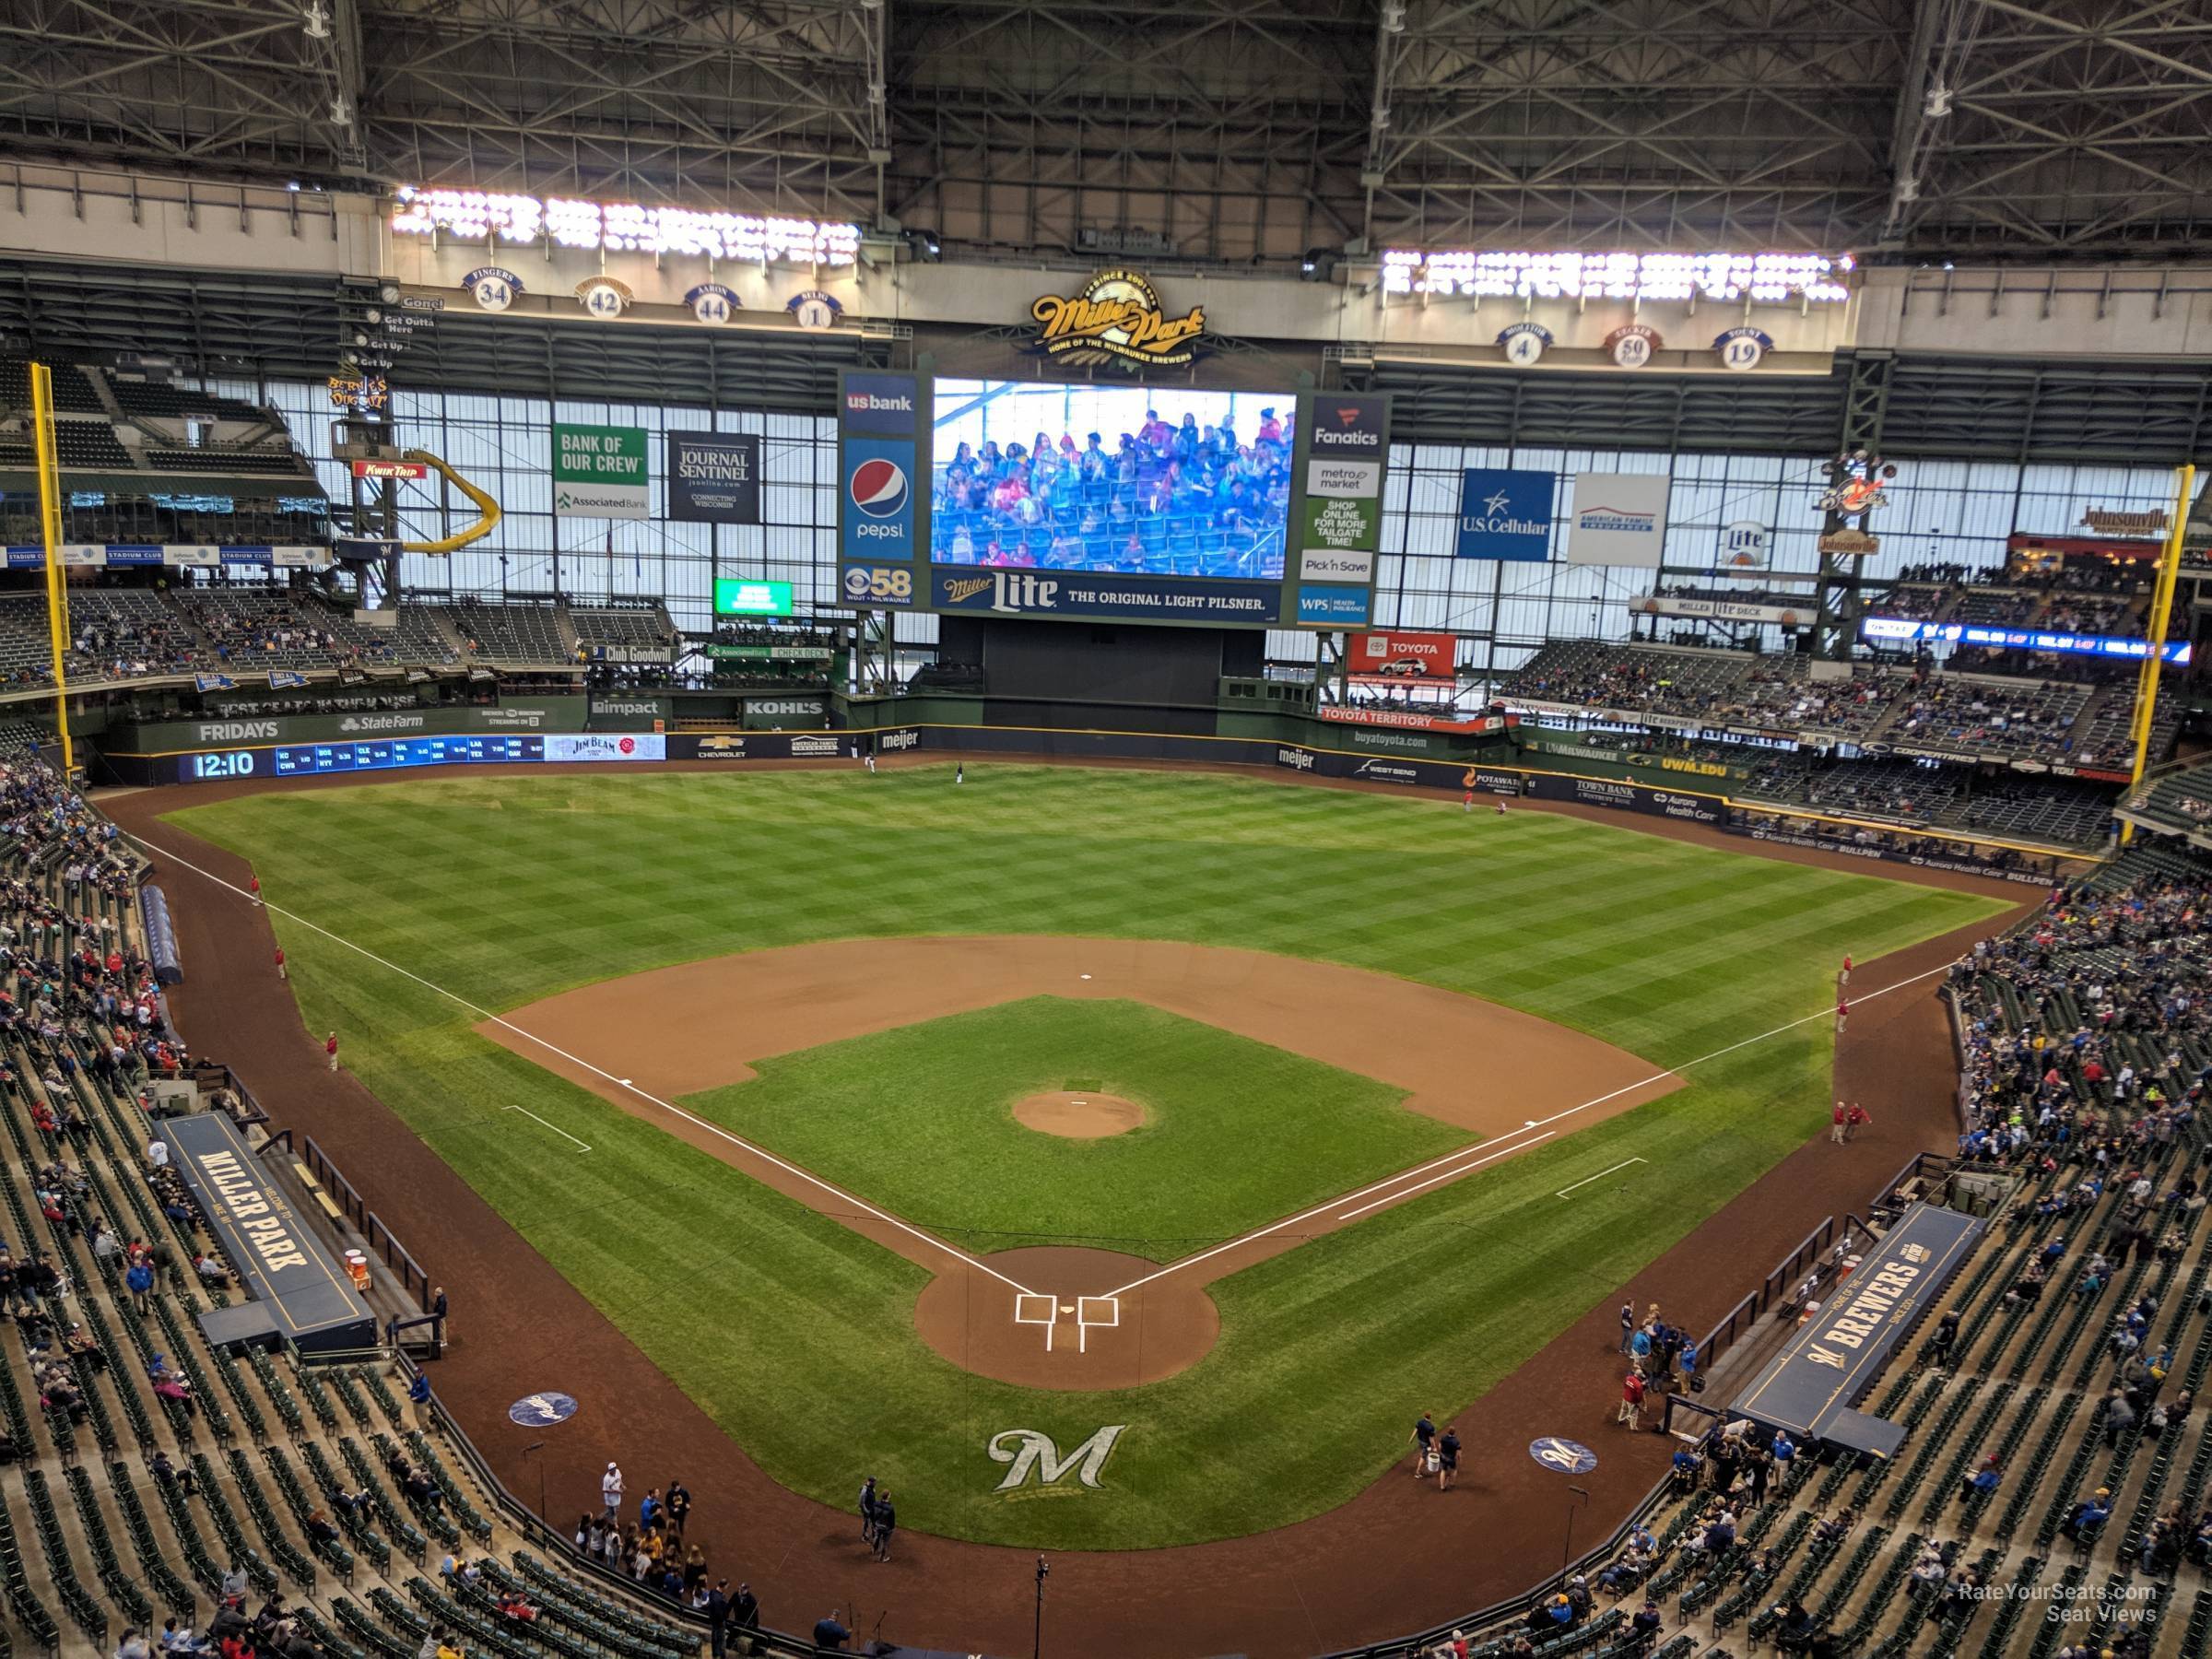 Day-by-day highlights of the Brewers' Aug. 8-14 homestand at Miller Park